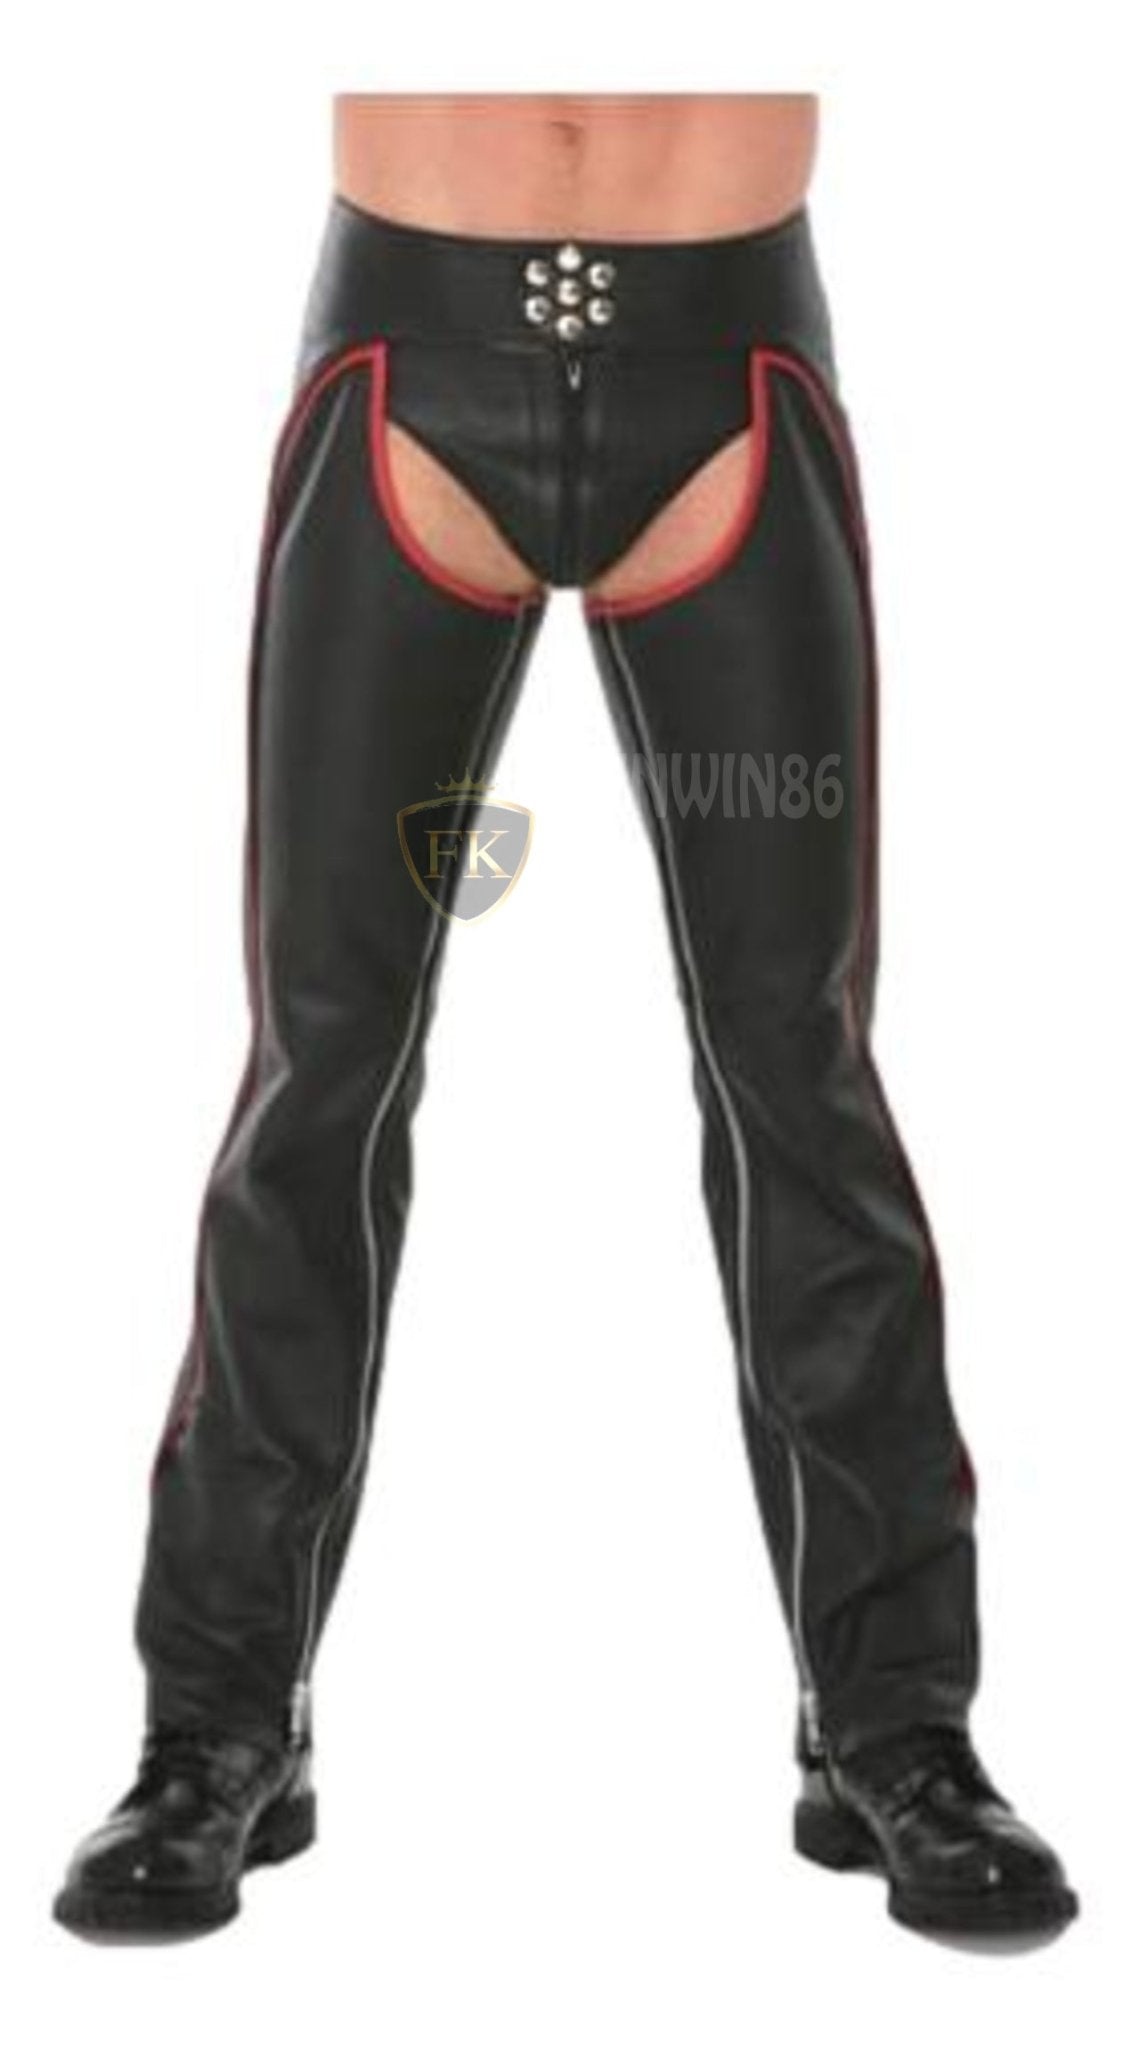 REAL LEATHER CHAPS elder fetish gay jeans pants GAY CHAPS/BIKER TROUES - MRI Leathers